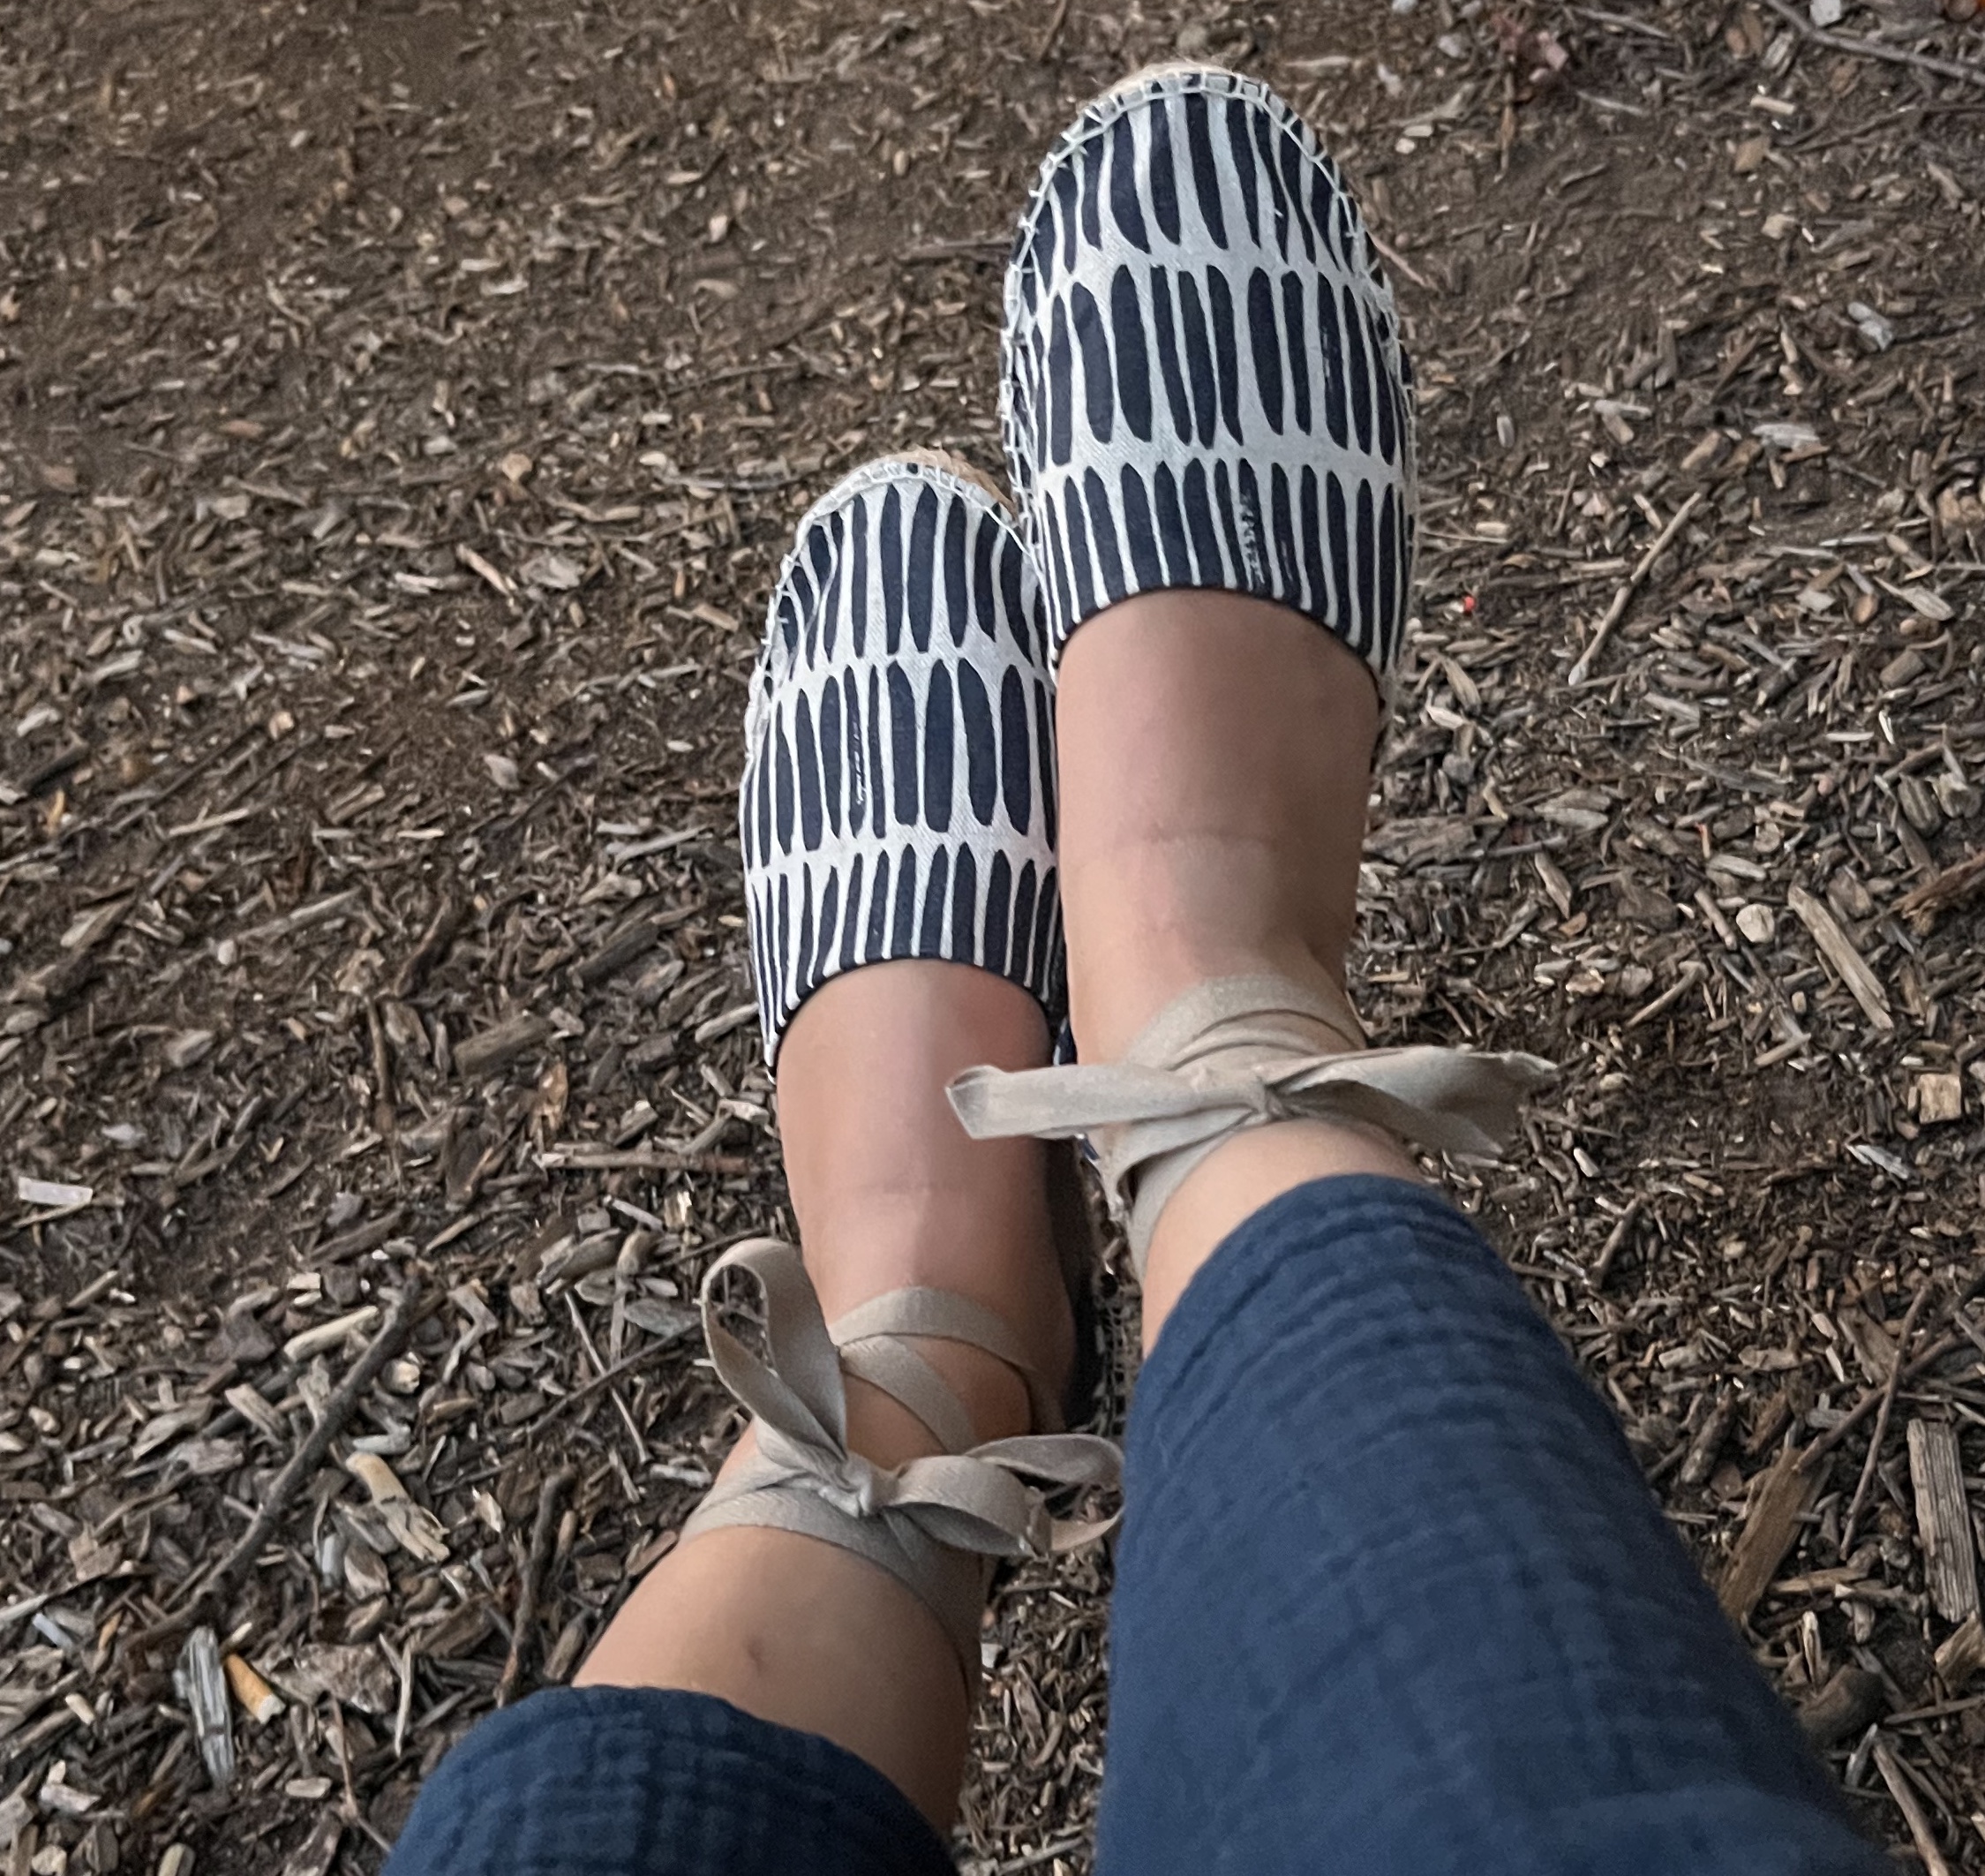 Sew your own espadrilles shoes!